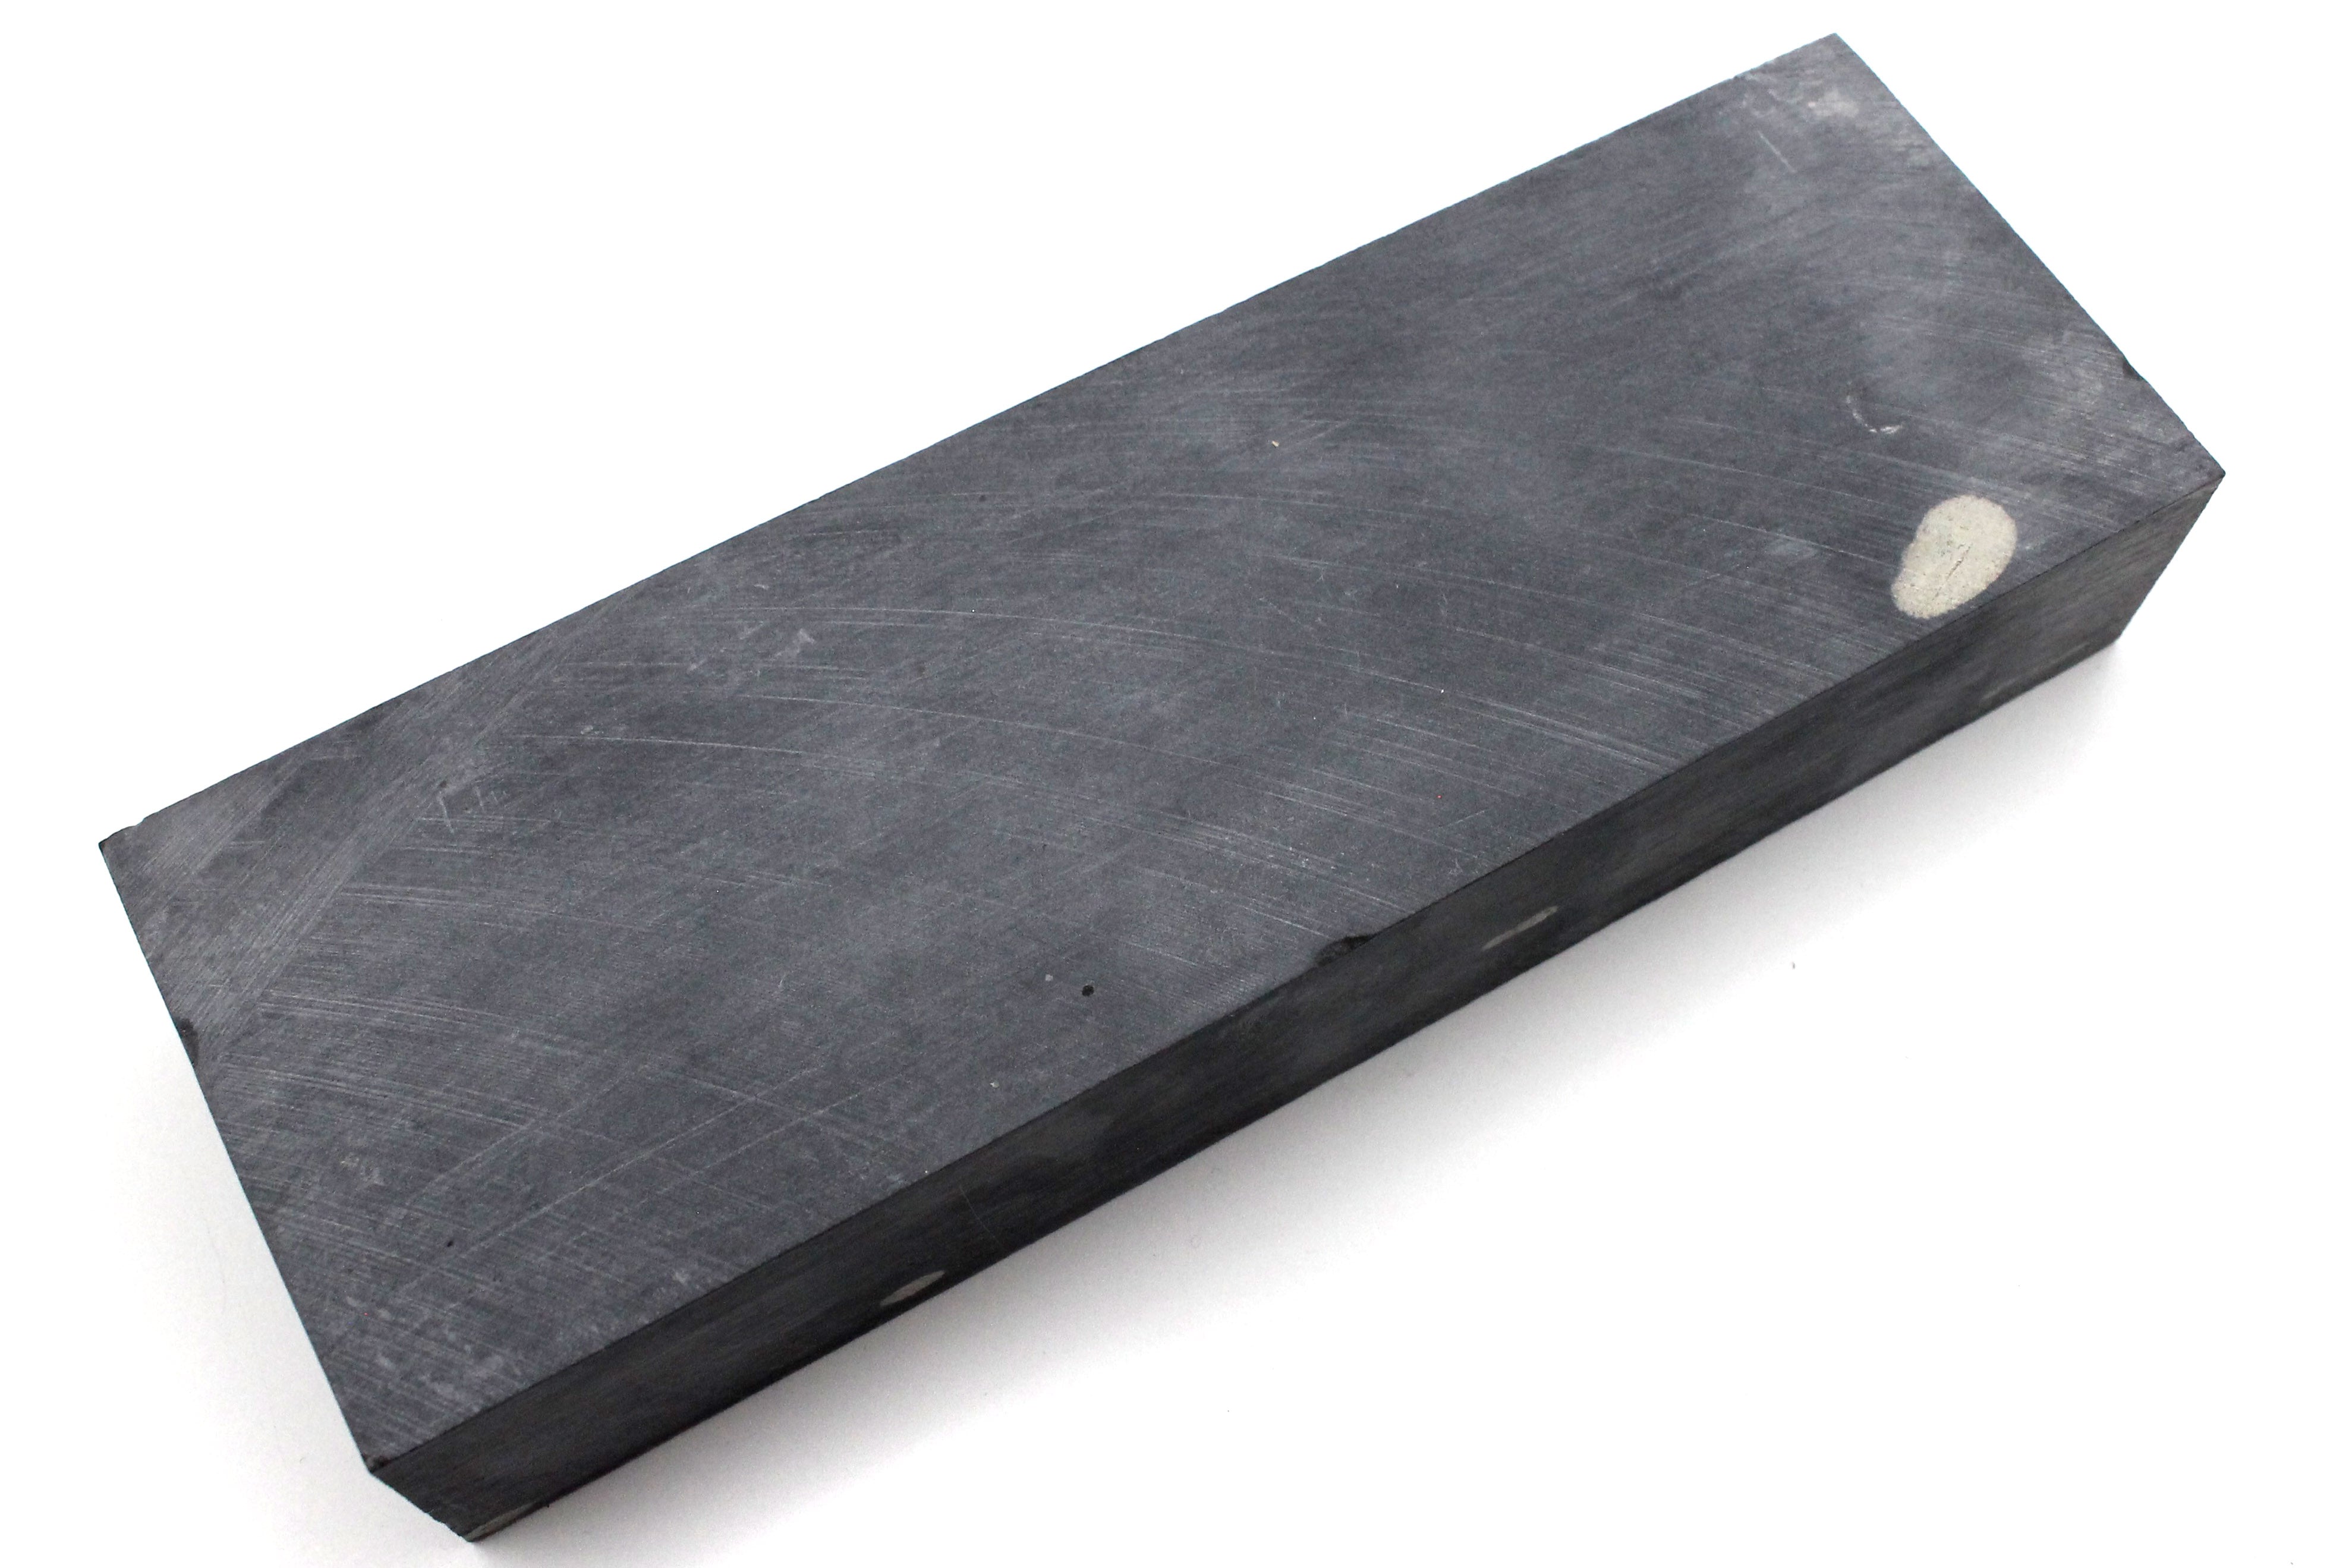 Water of Ayr Old Stock Natural Scottish Sharpening & Honing Stone - 6” (152mm) x 2” (51mm) x 1" (25mm)